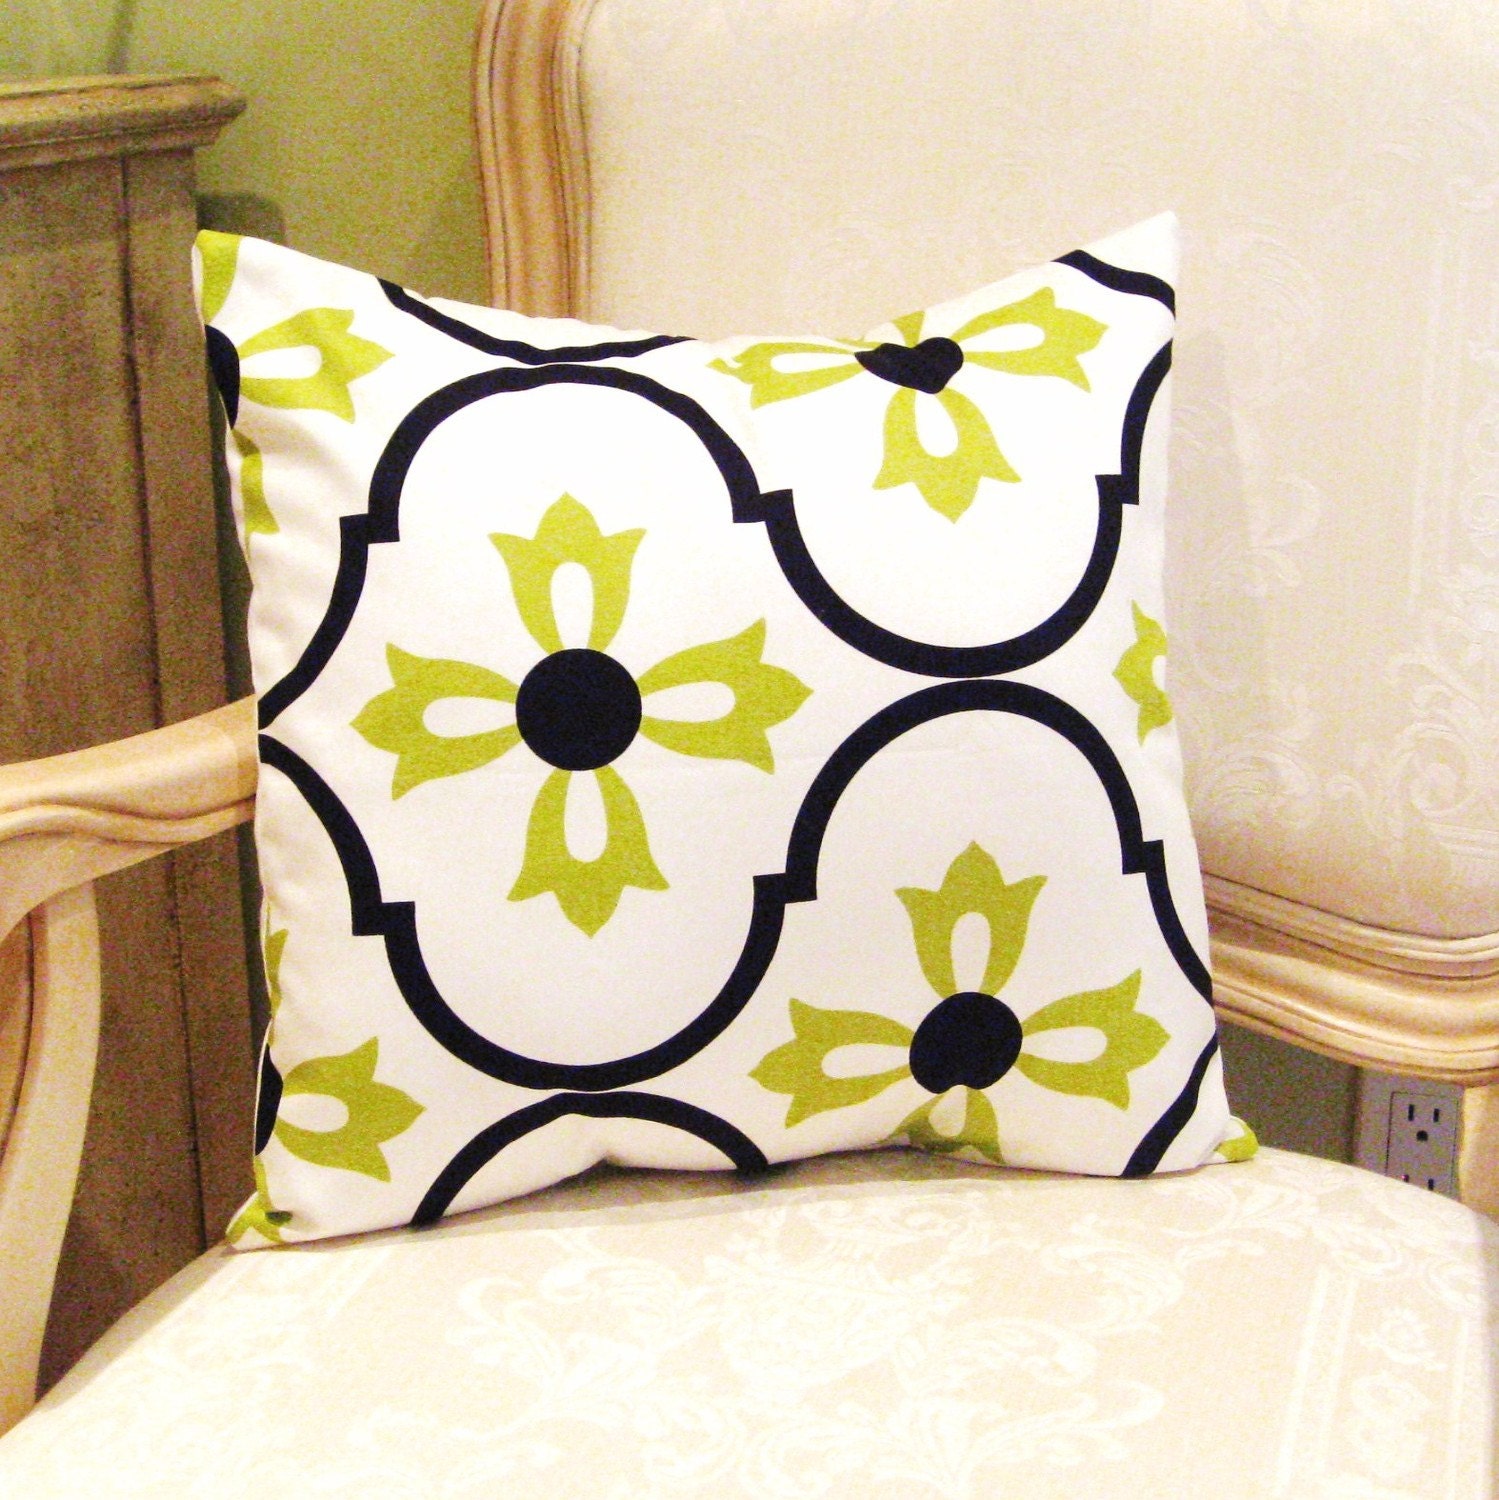 16x16 inch Handmade Pillow Cushion Cover Case in Designer Vicki Payne, Logan, Blossom in Lime by LMcreation on Etsy